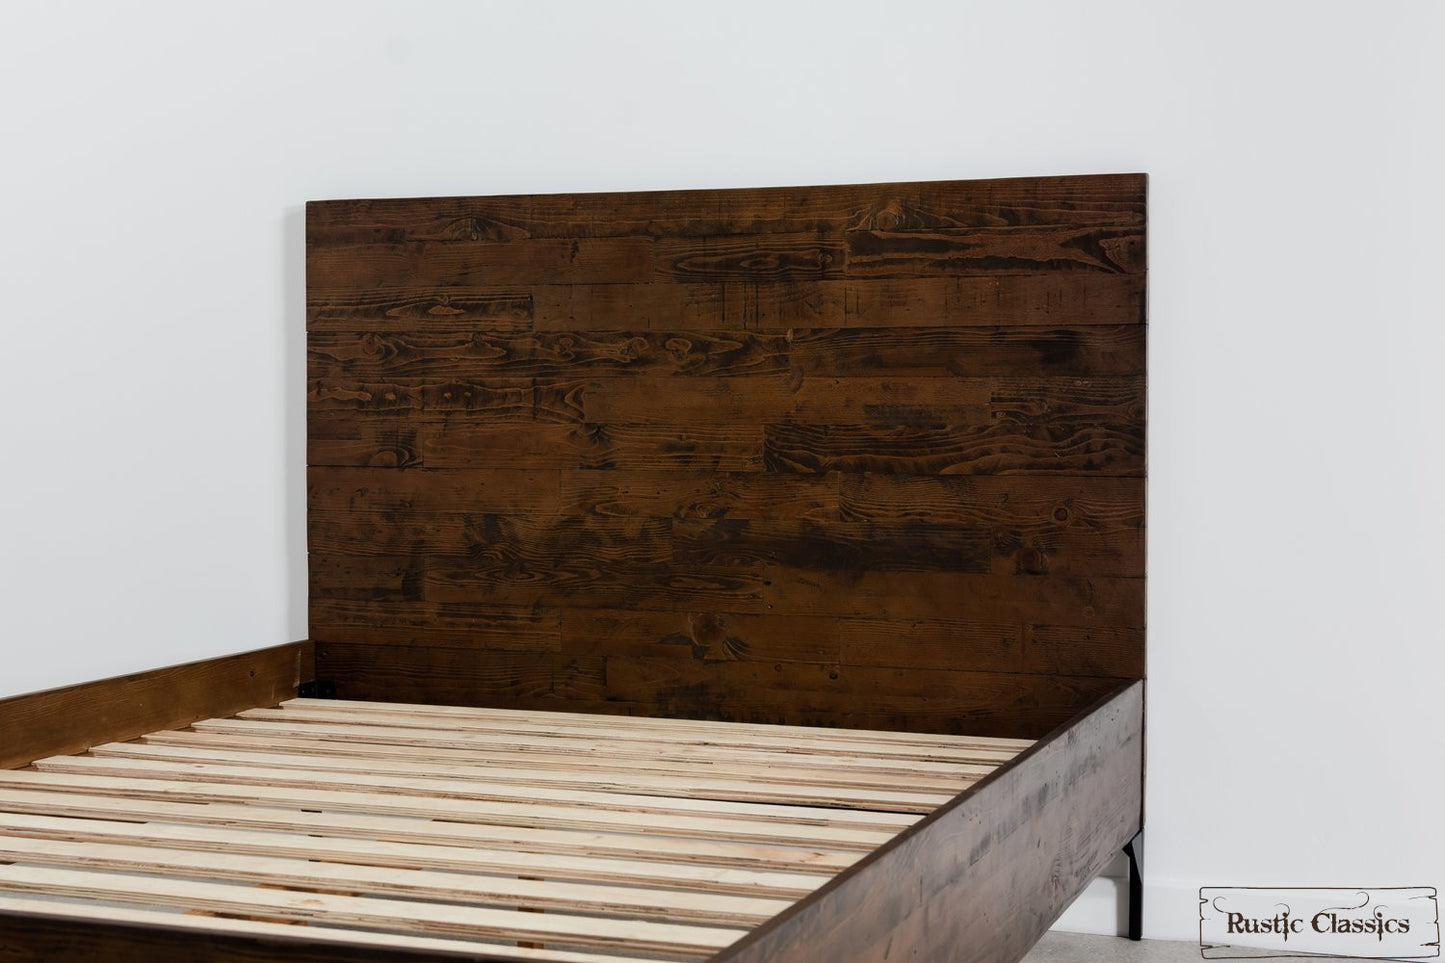 Blackcomb 4 Piece Reclaimed Wood and Metal Platform Bedroom Furniture Set in Coffee Bean - Available in 2 Sizes